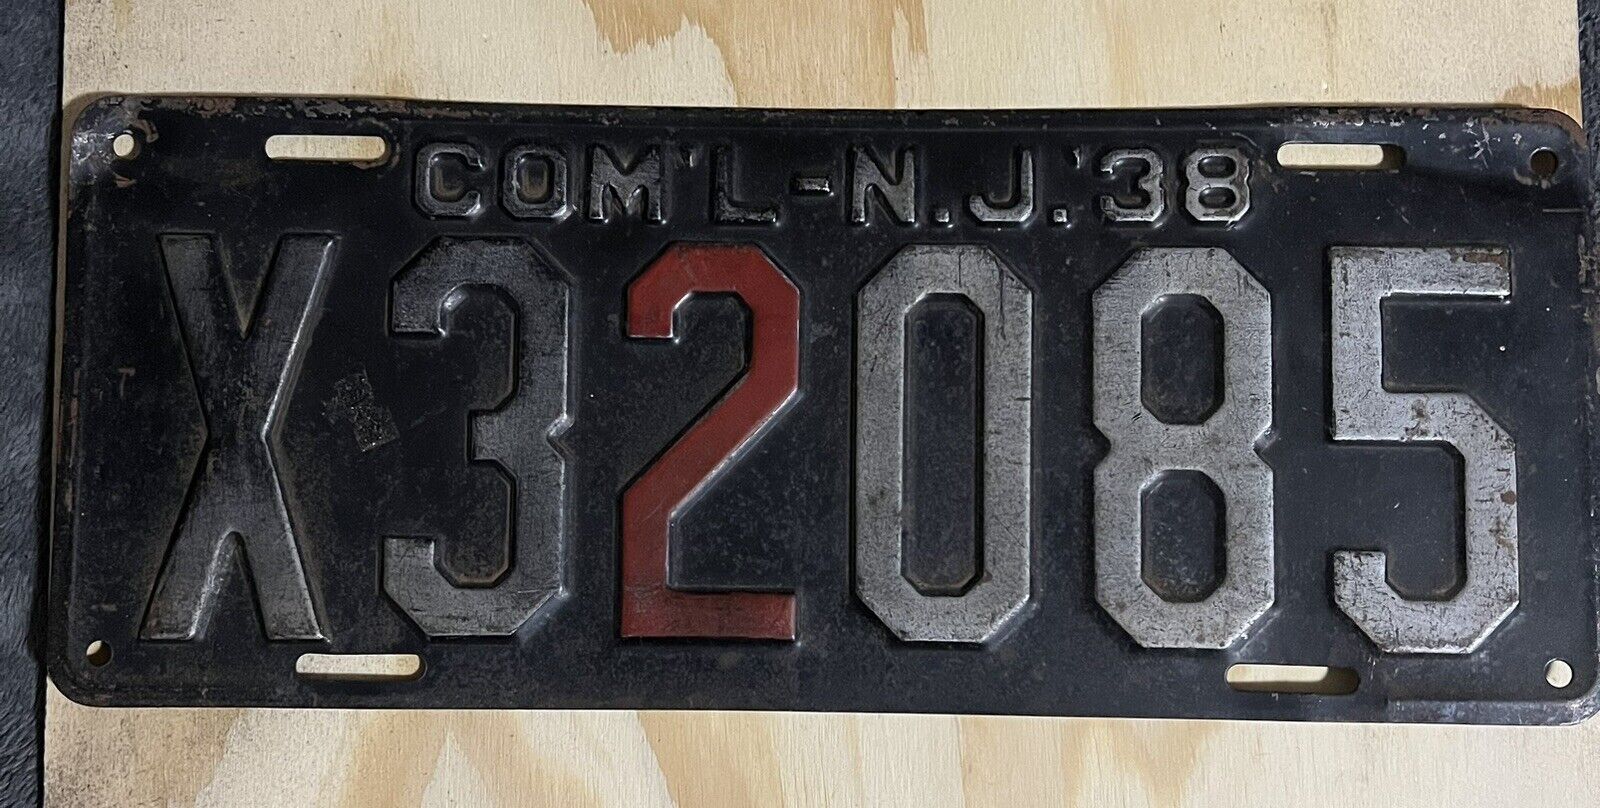 Vintage 1938 New Jersey Commercial License Plate - Antique